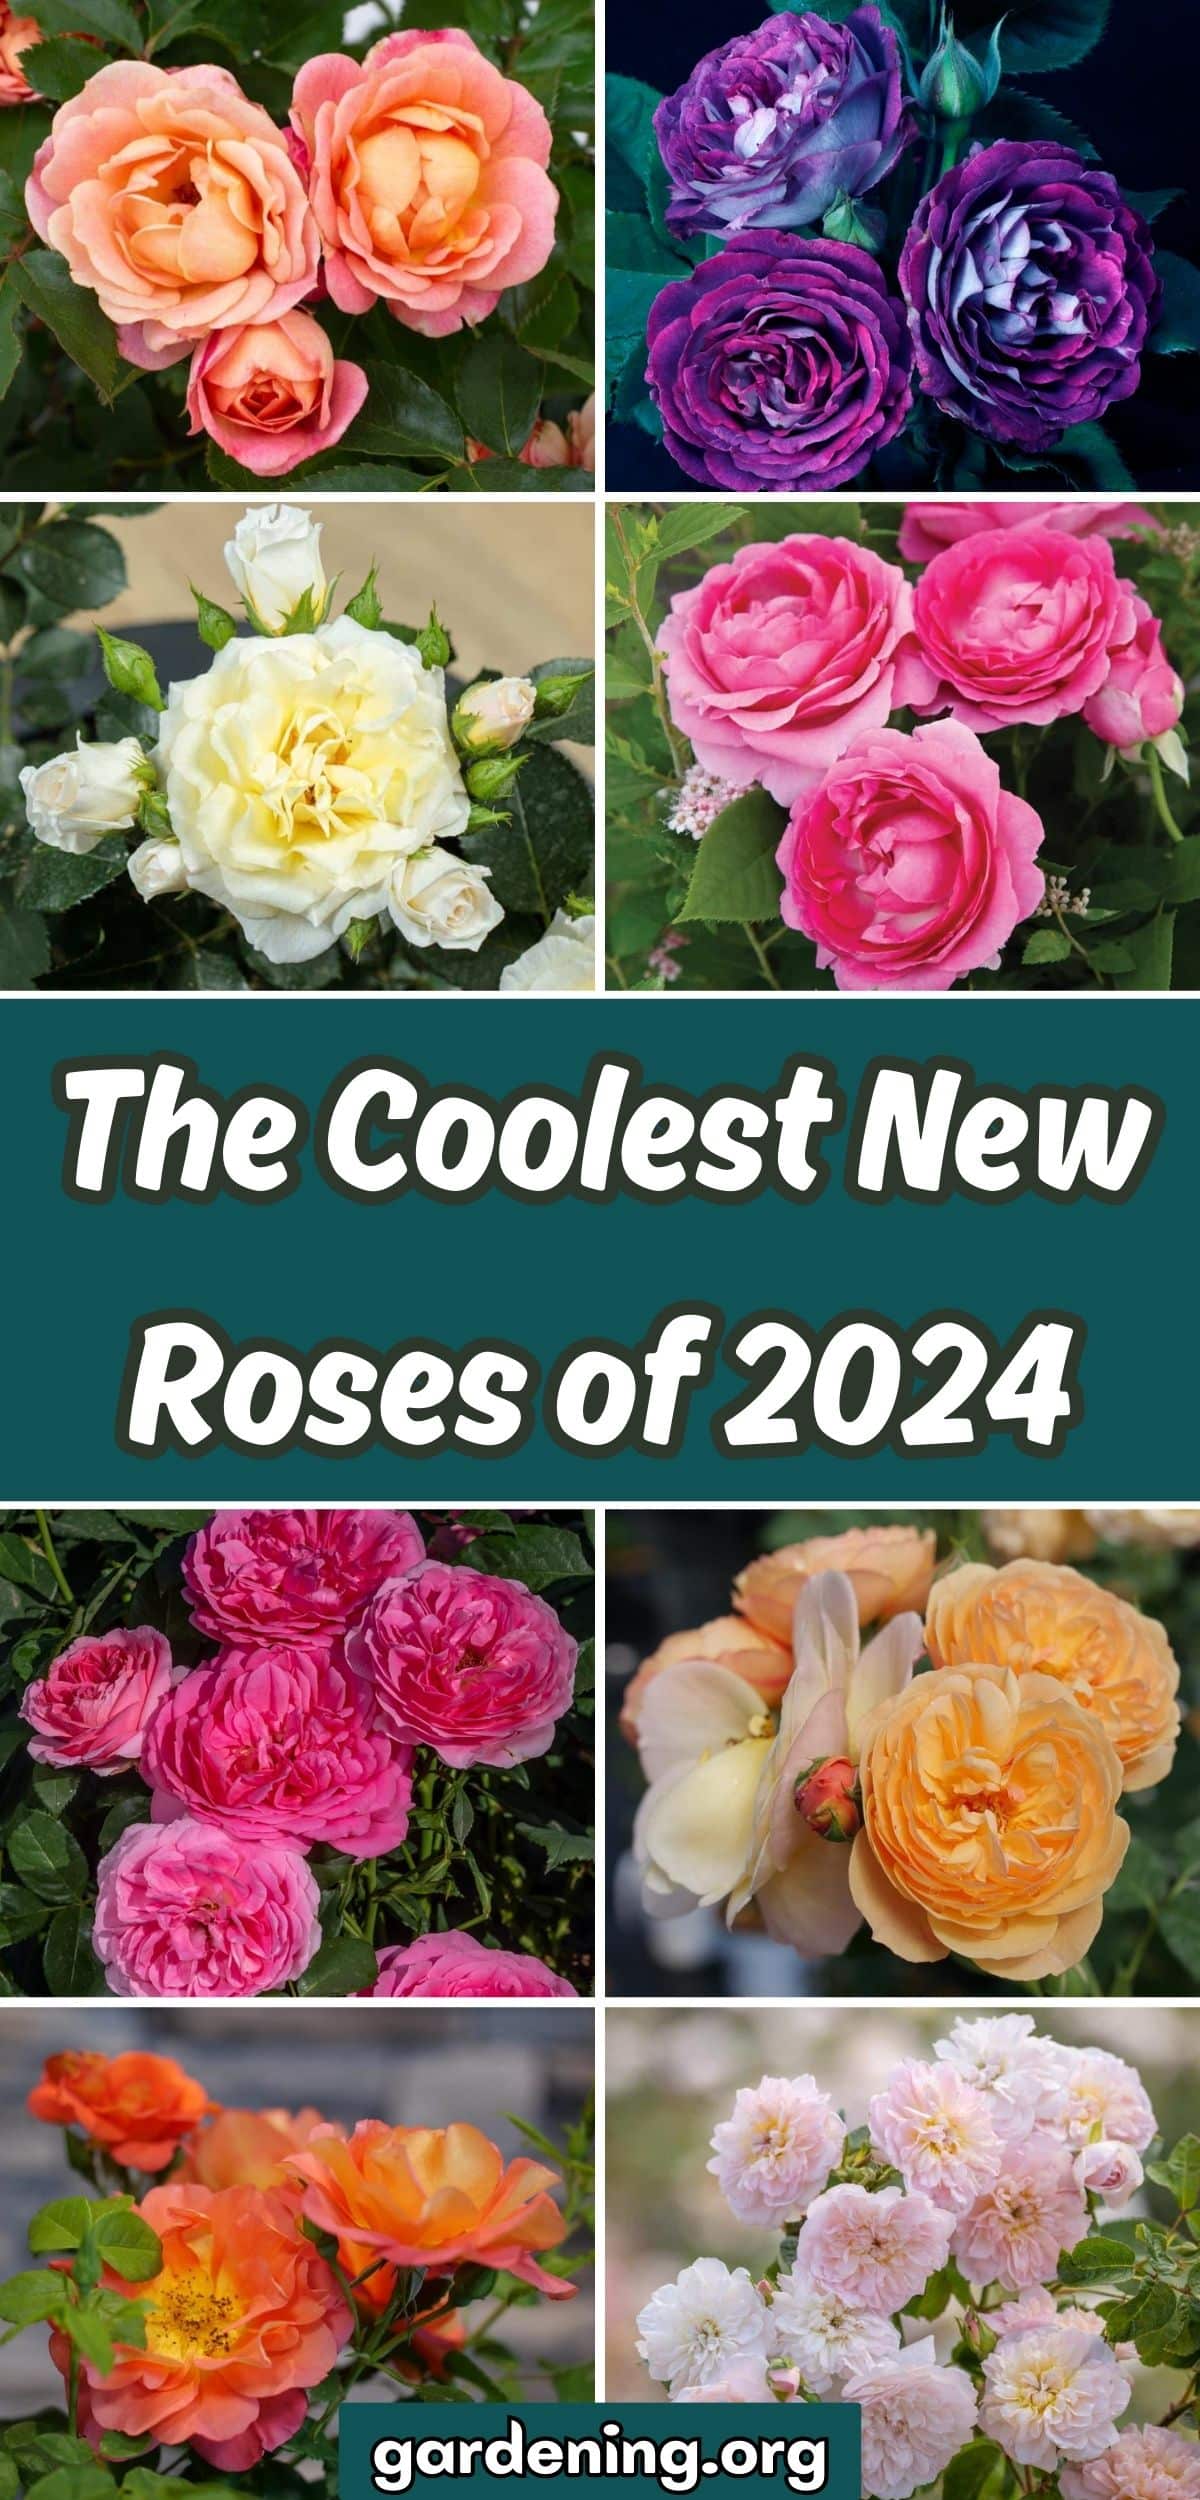 The Coolest New Roses of 2024 collage.